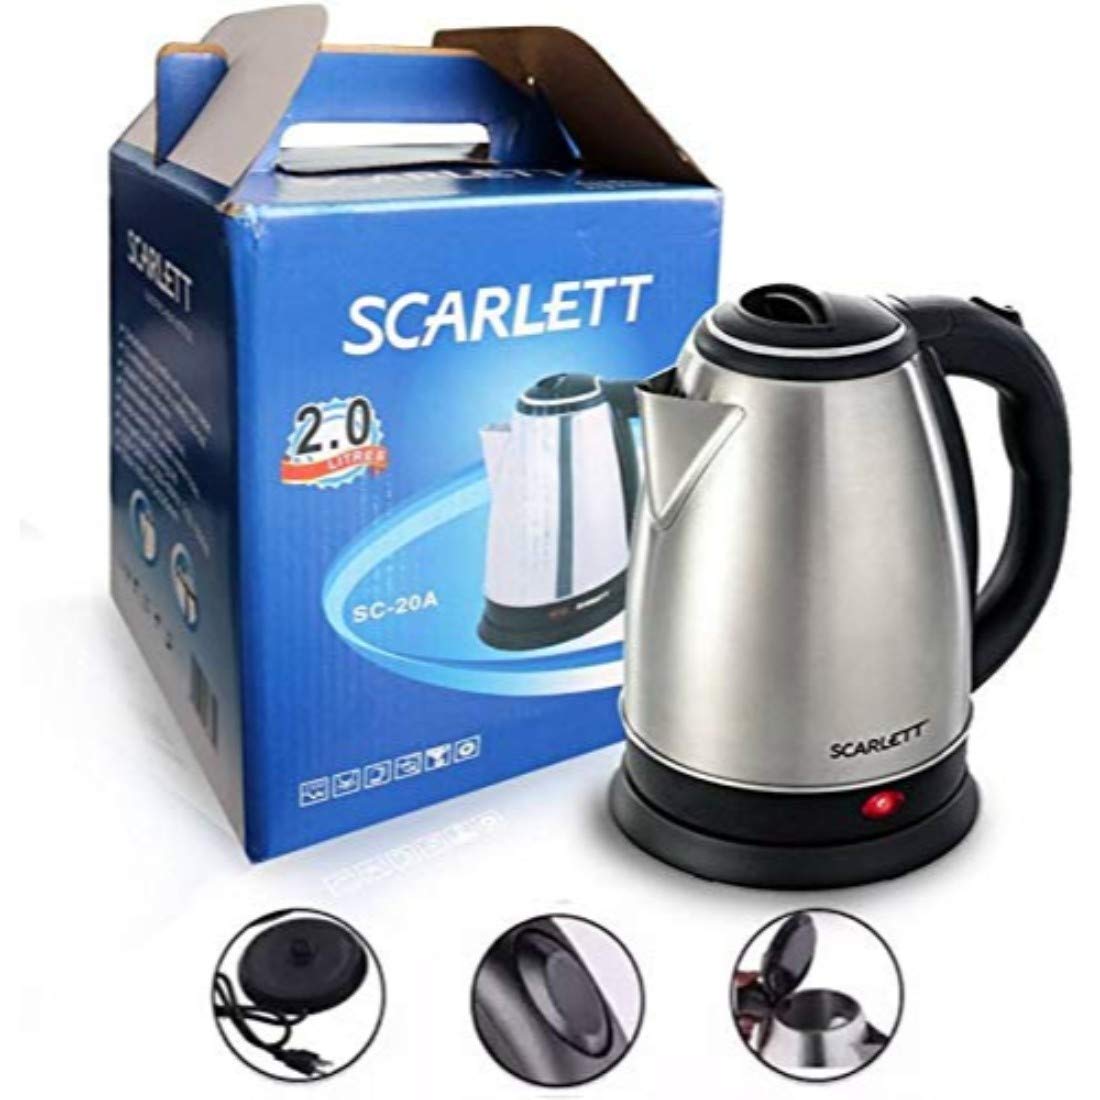 Awesome Kenyan Meals - 2L electric kettle Now 2400/=